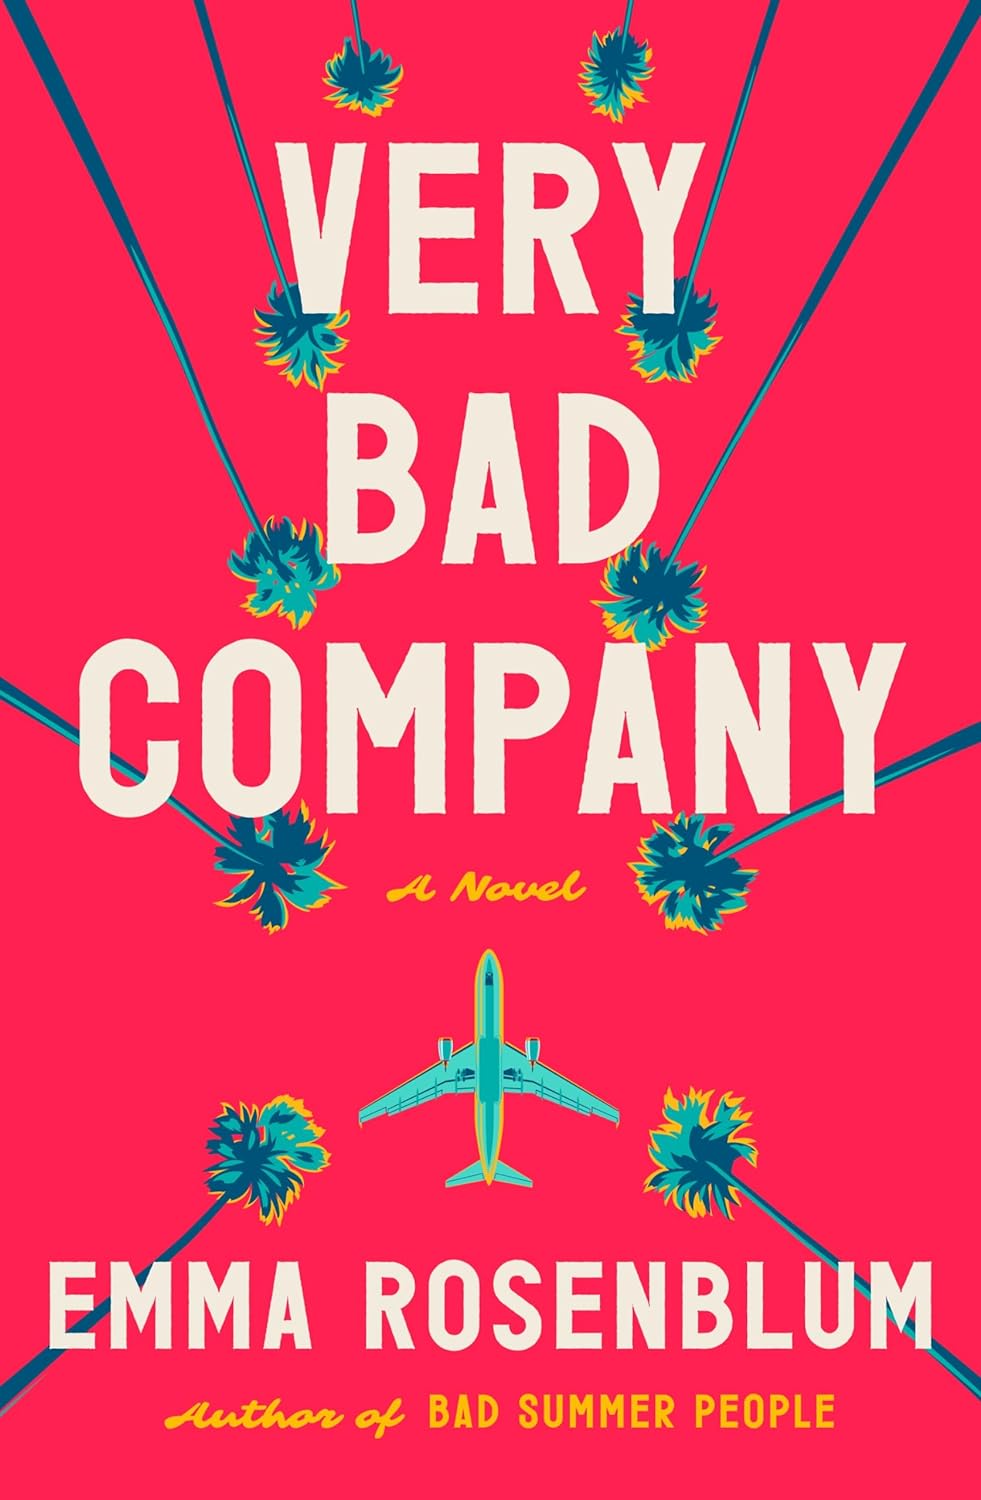 Image for "Very Bad Company"